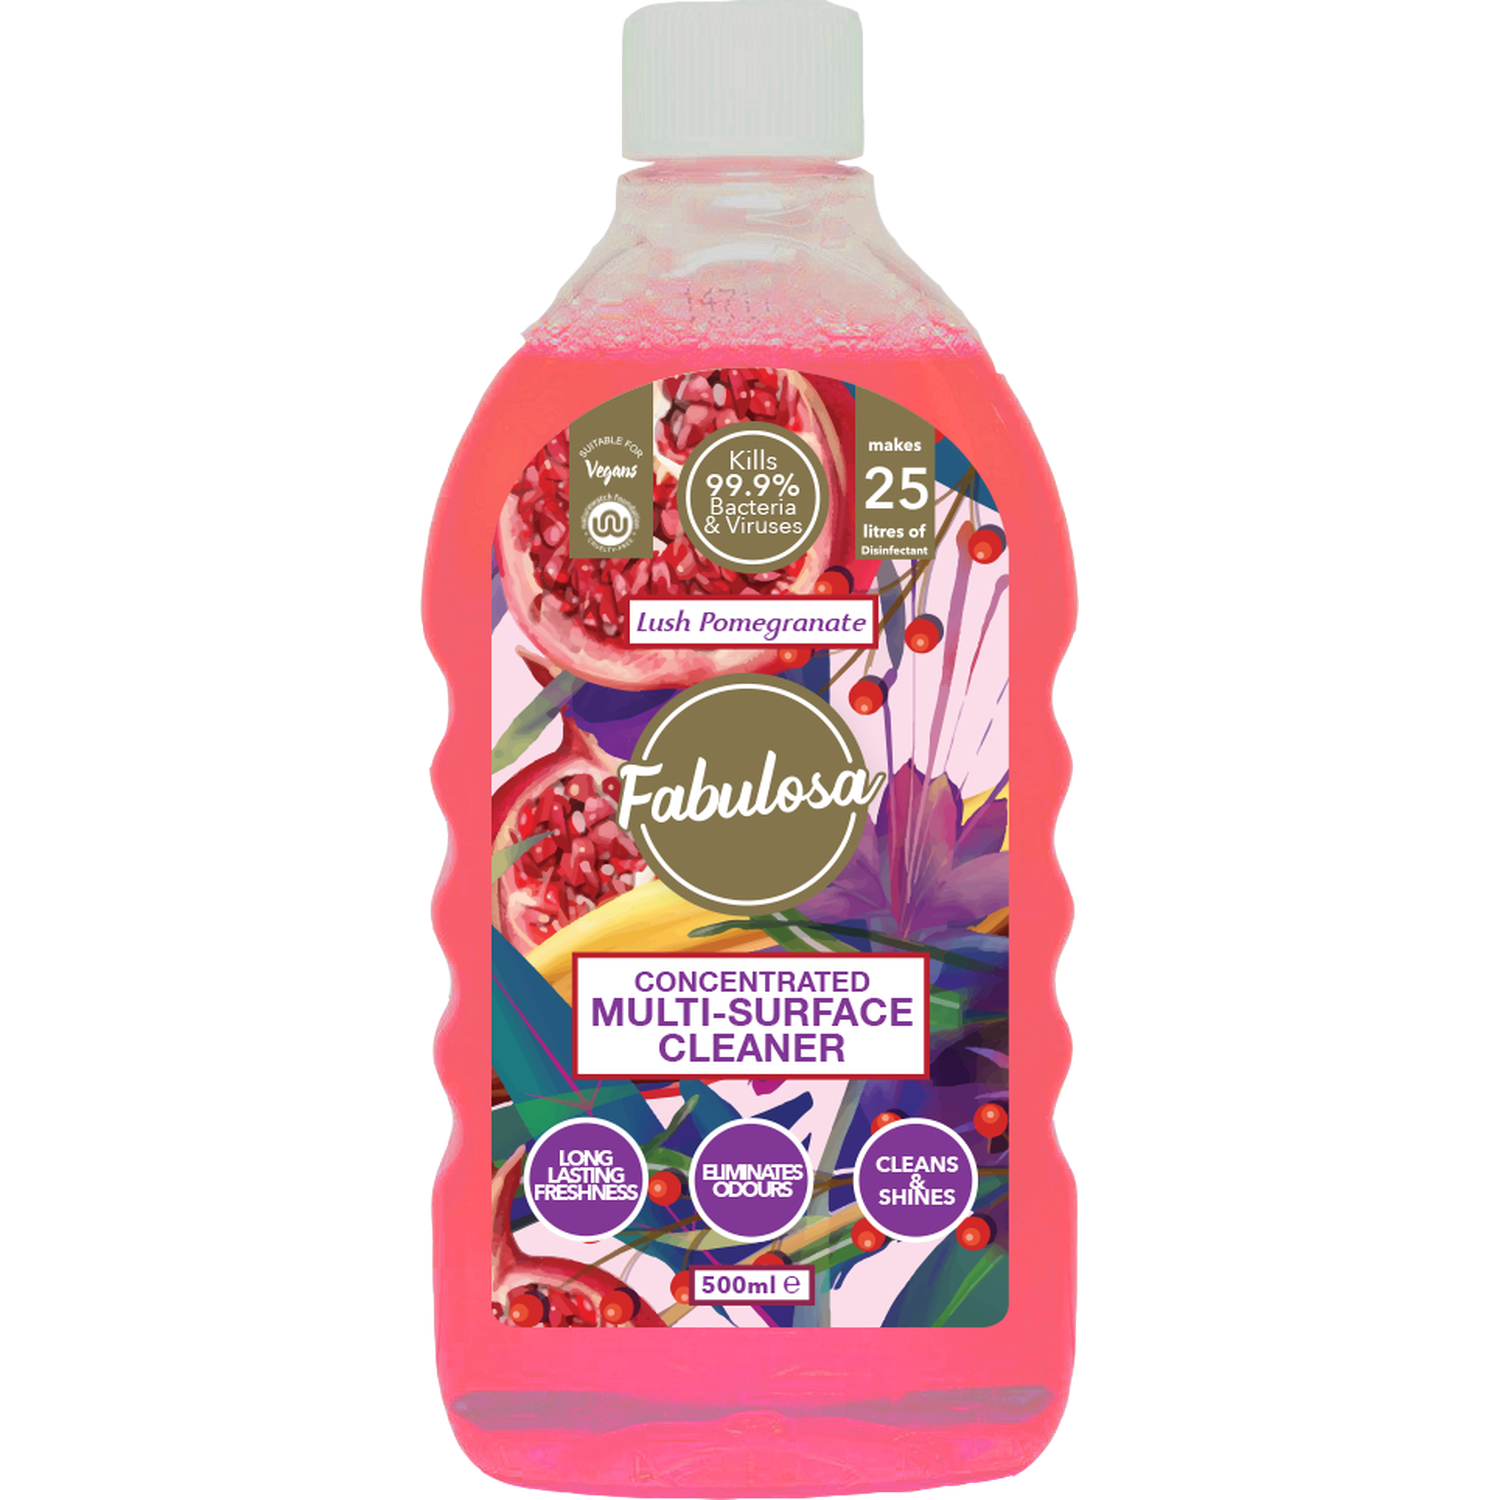 Fabulosa Concentrated Disinfectant - Lush Pomegranate Image